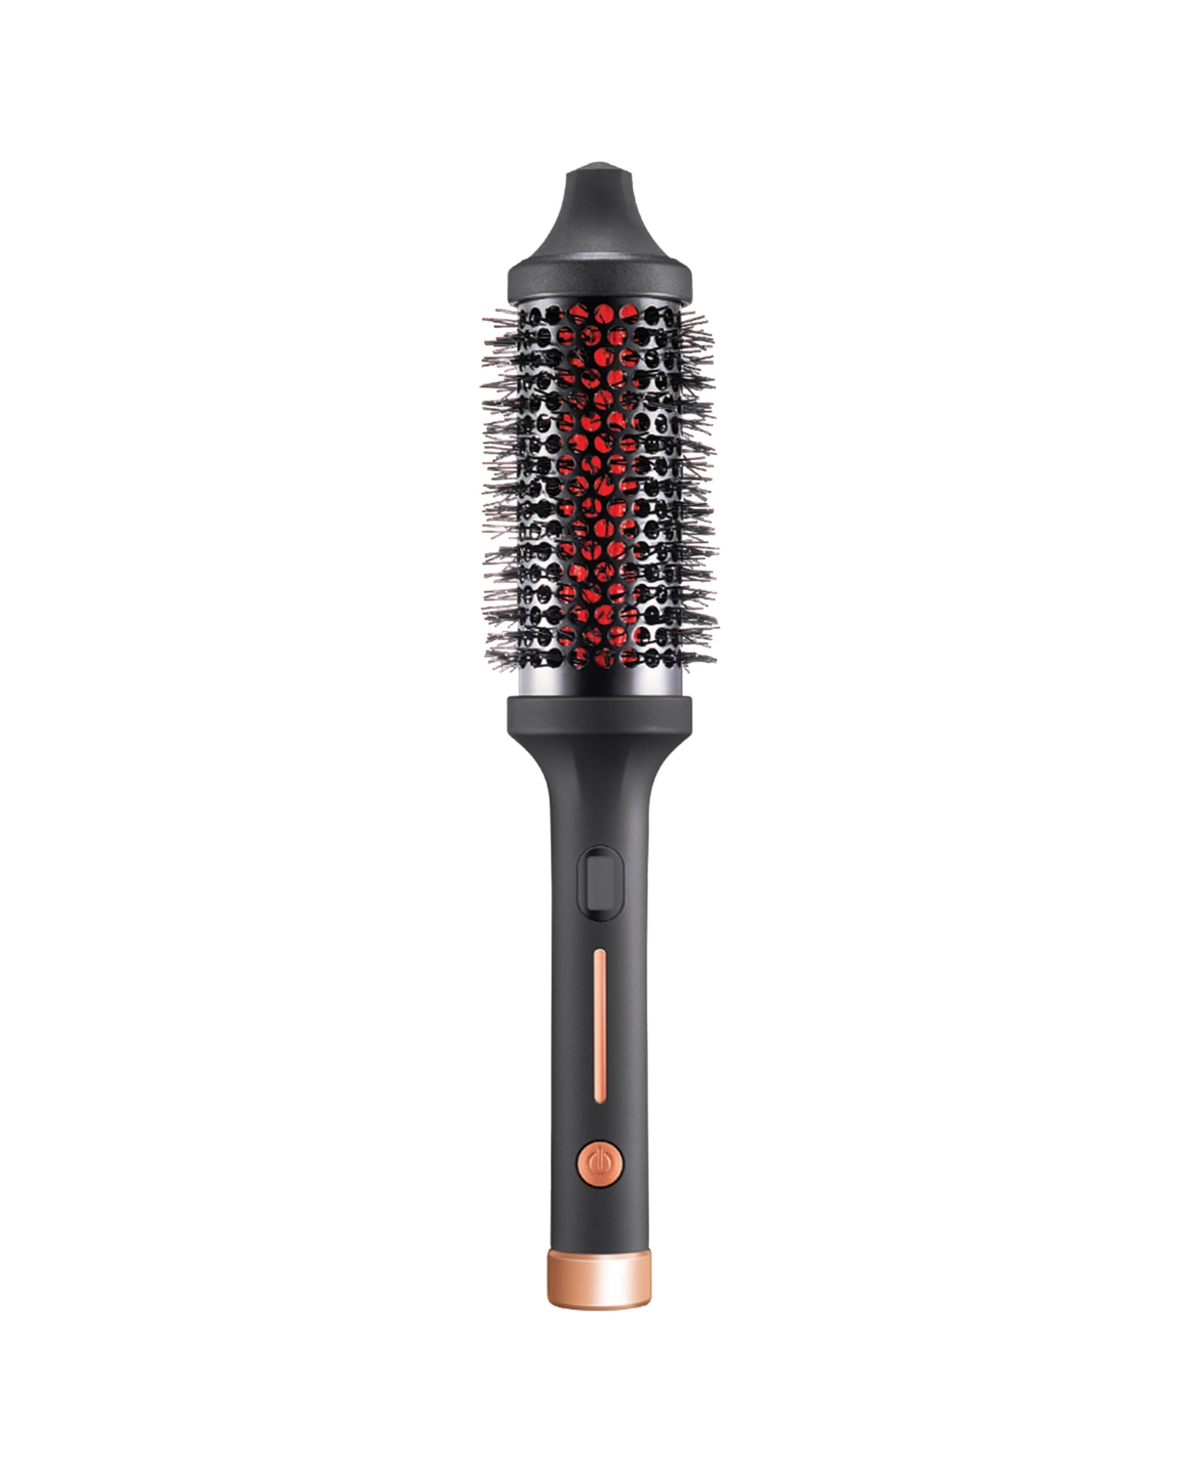 Infrared Thermal Brush with Far Infrared Technology